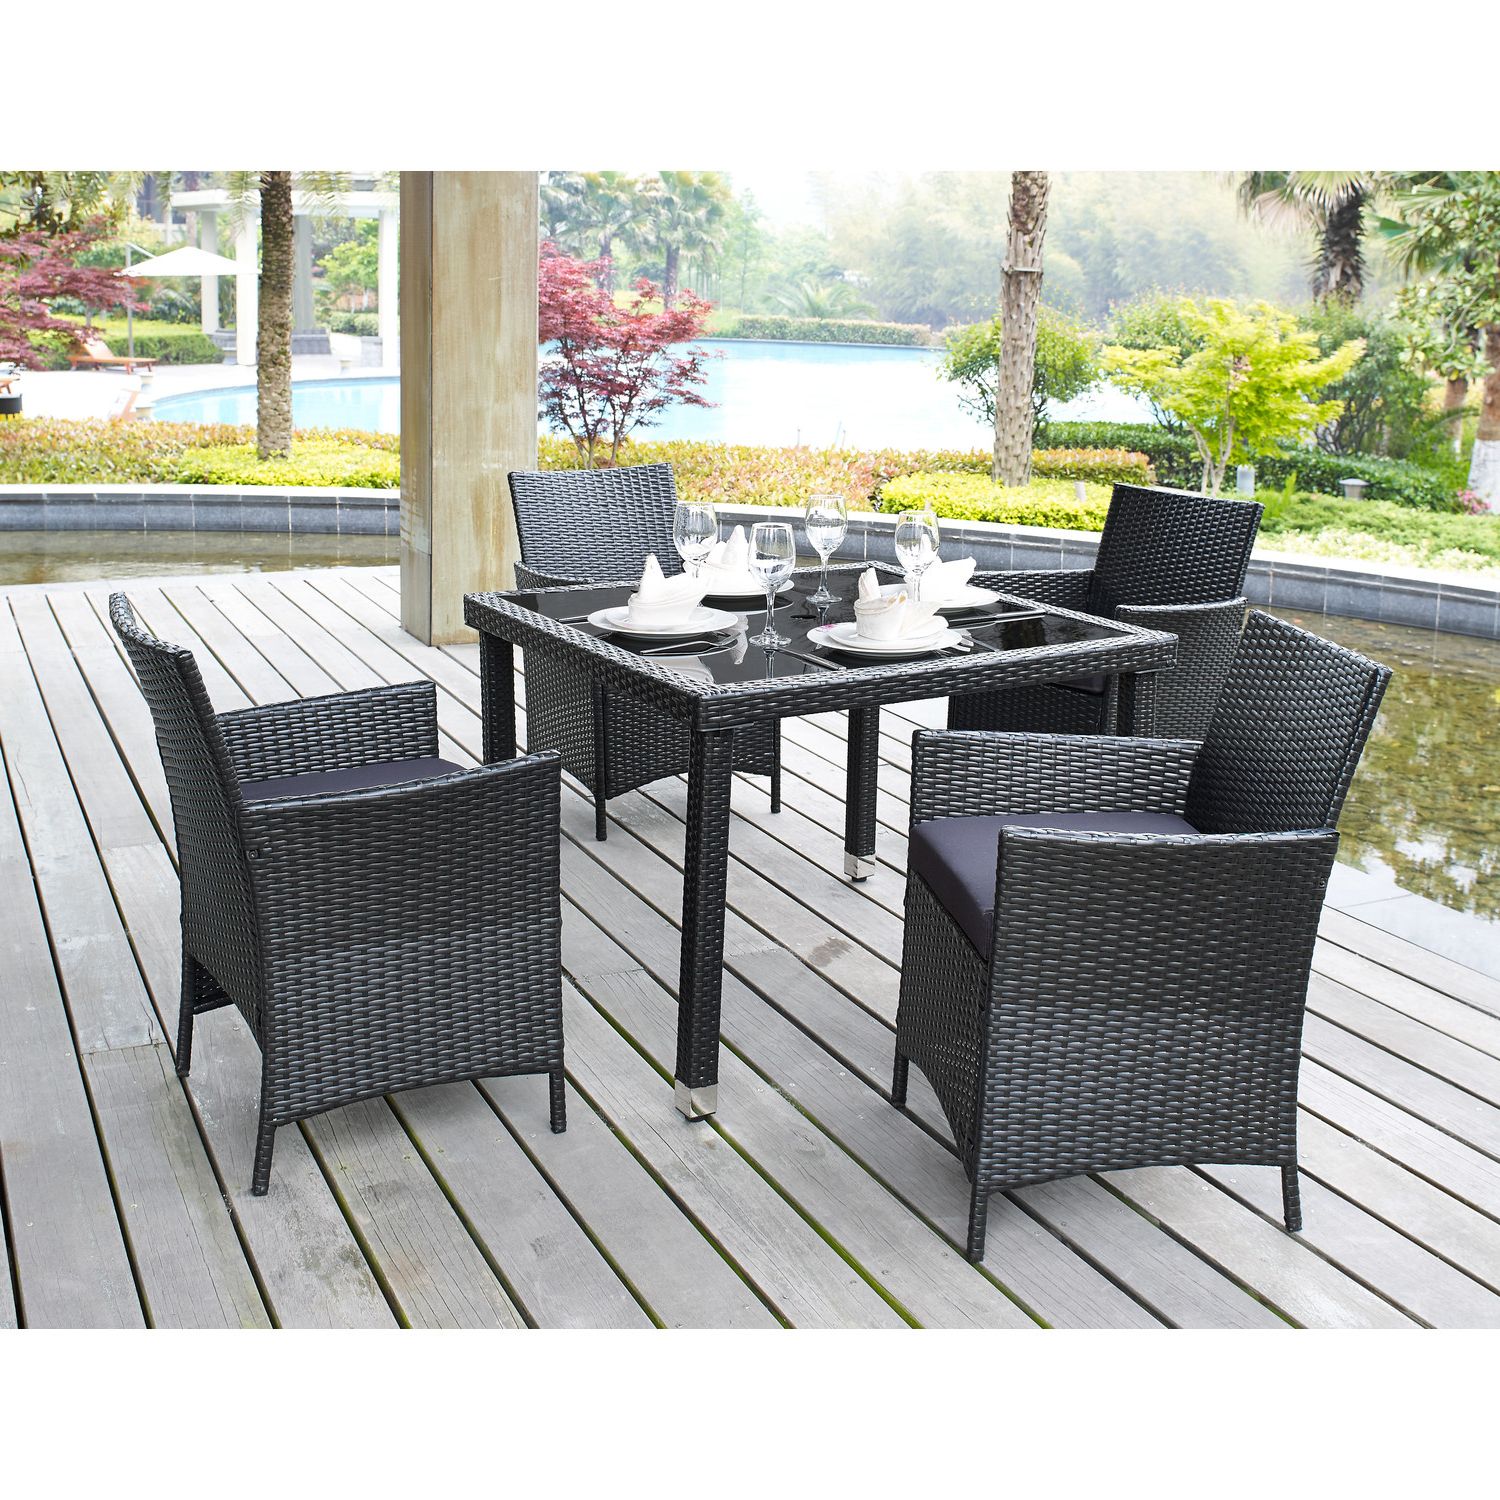 Places To Go For Affordable Modern Outdoor Furniture – Homesfeed In Favorite Black Outdoor Dining Modern Chairs Sets (View 8 of 15)